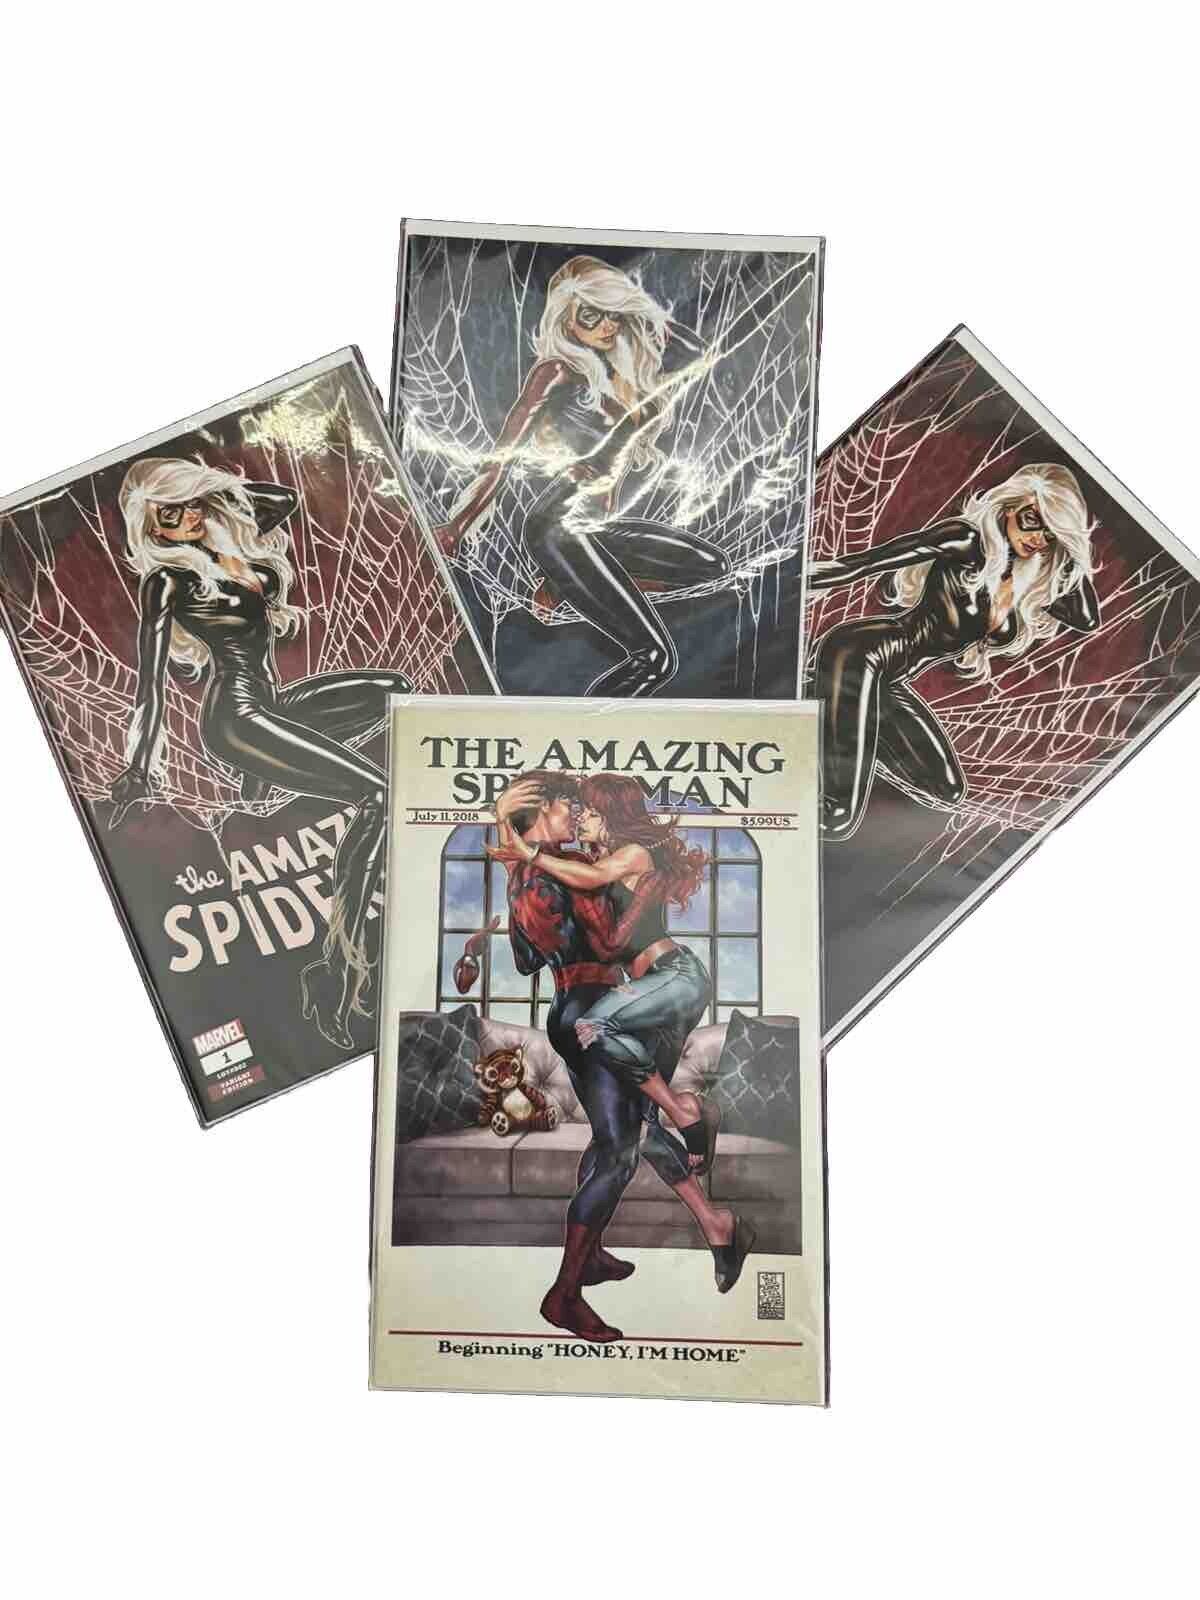 The Amazing Spider-man #1 Mark Brooks Black Cat Variant Cover A, B, C, D lot